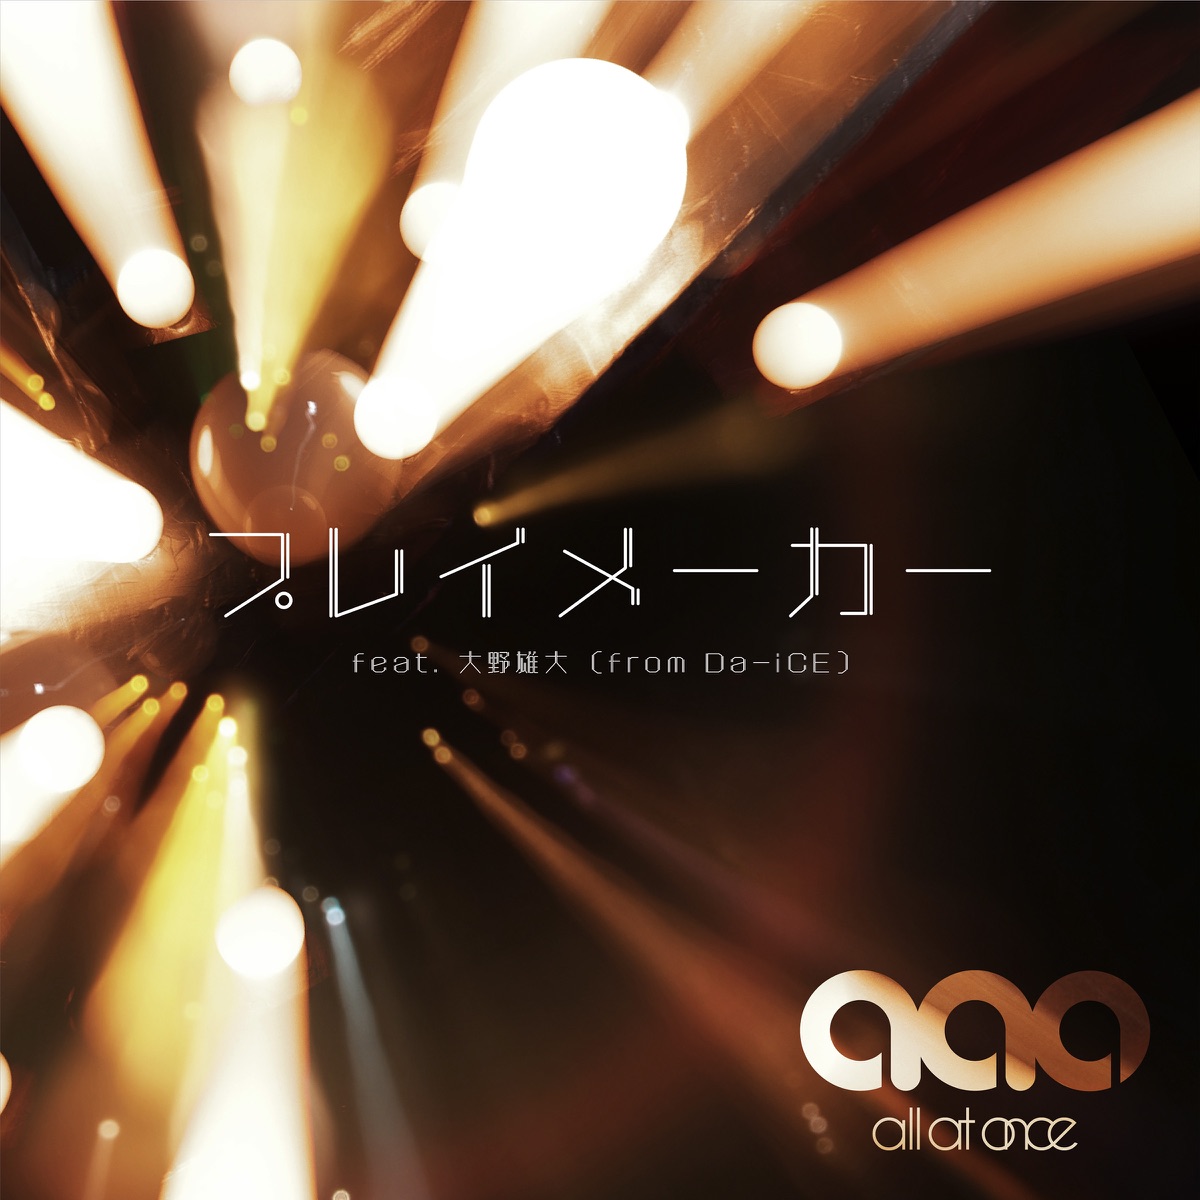 『all at once - プレイメーカー feat.大野雄大(from Da-iCE)』収録の『プレイメーカー feat.大野雄大(from Da-iCE)』ジャケット